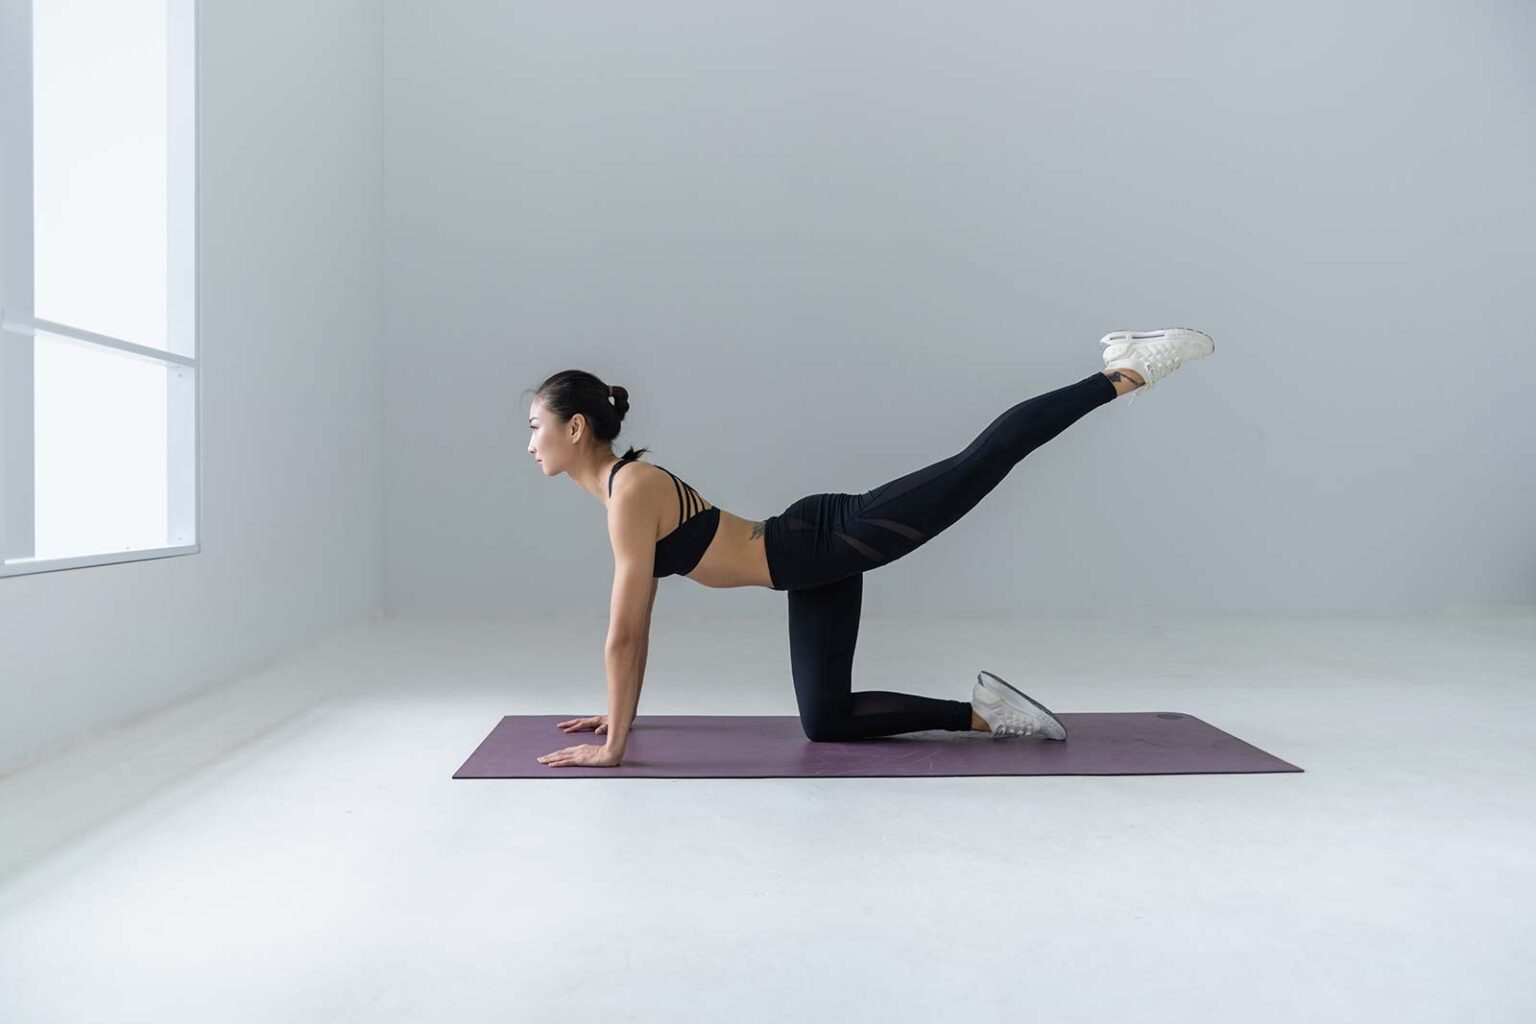 Pilates has become increasingly popular over the last few decades. Here's how Pilates can change your life in many ways.